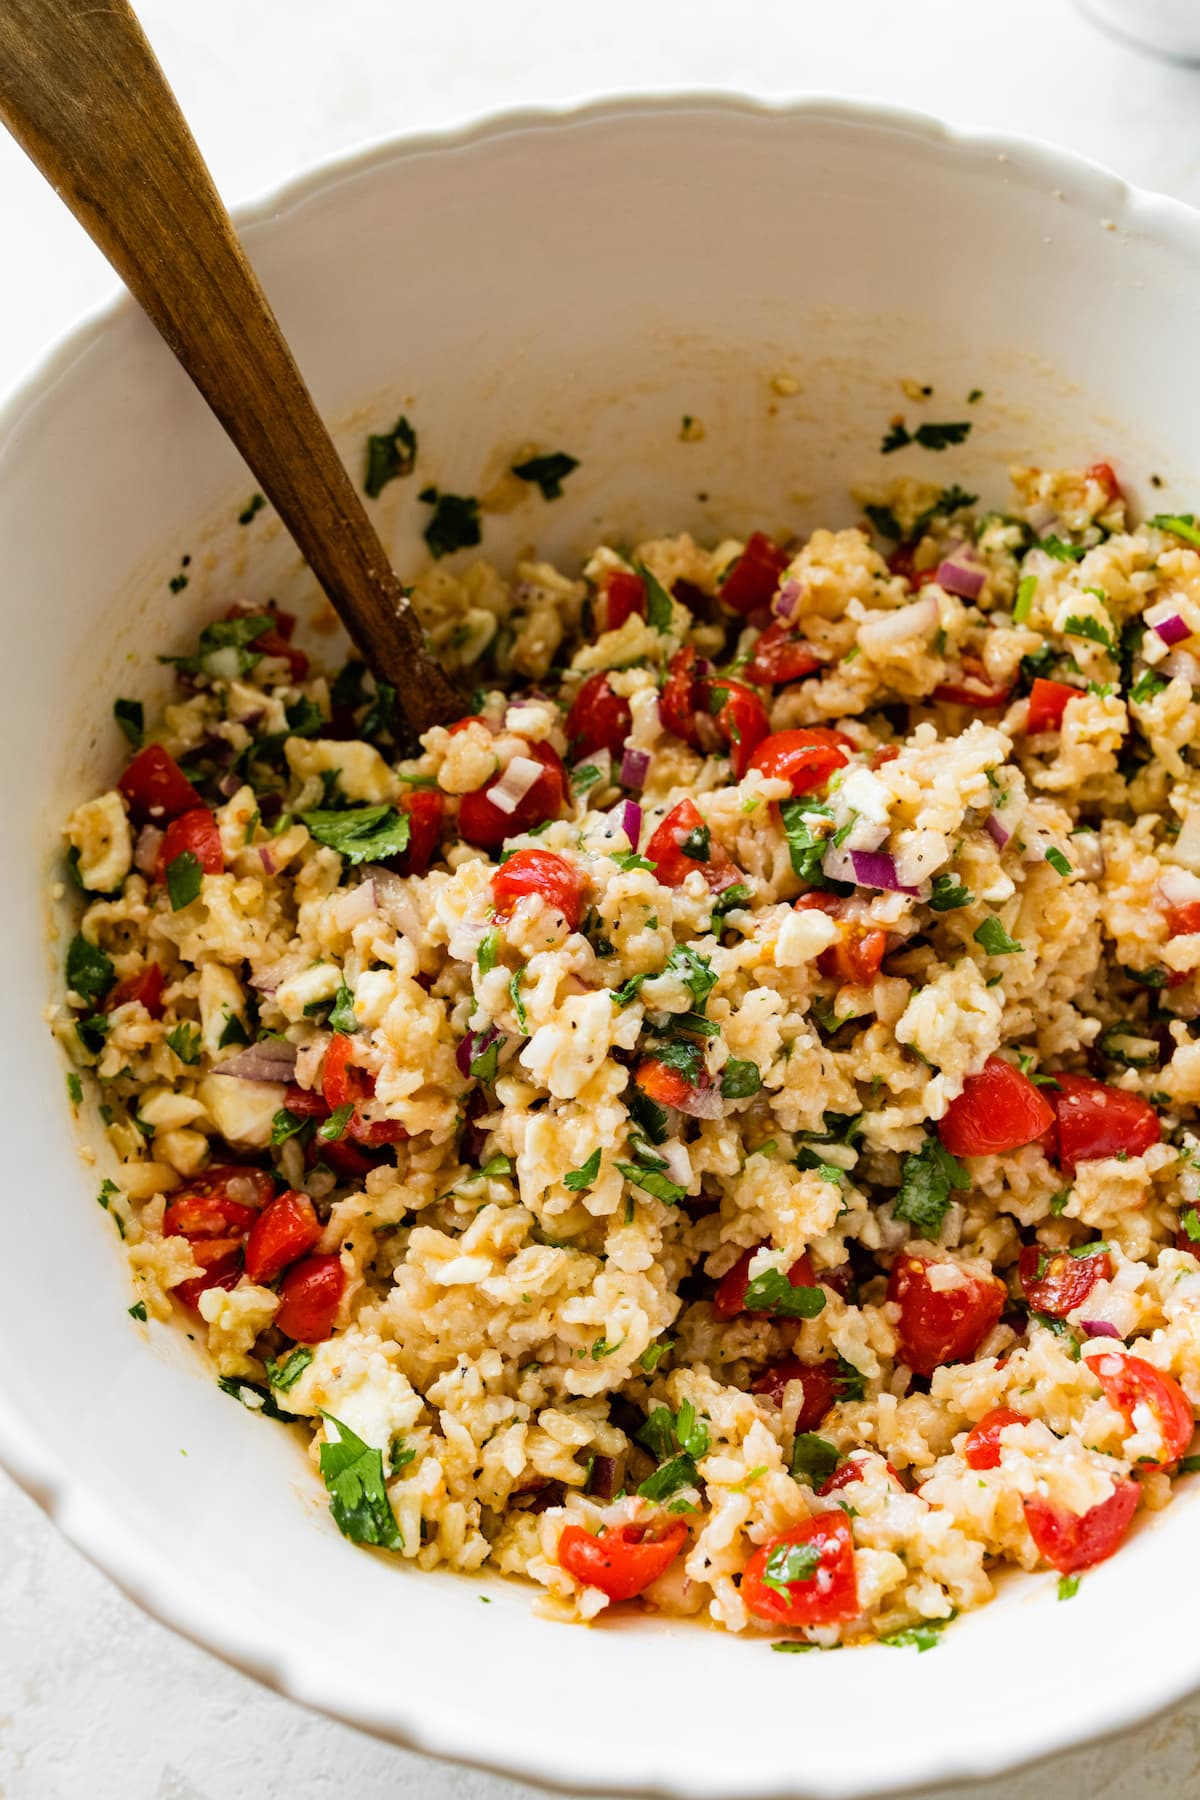 Mediterranean brown rice salad in a large white mixing bowl with a wooden spoon.